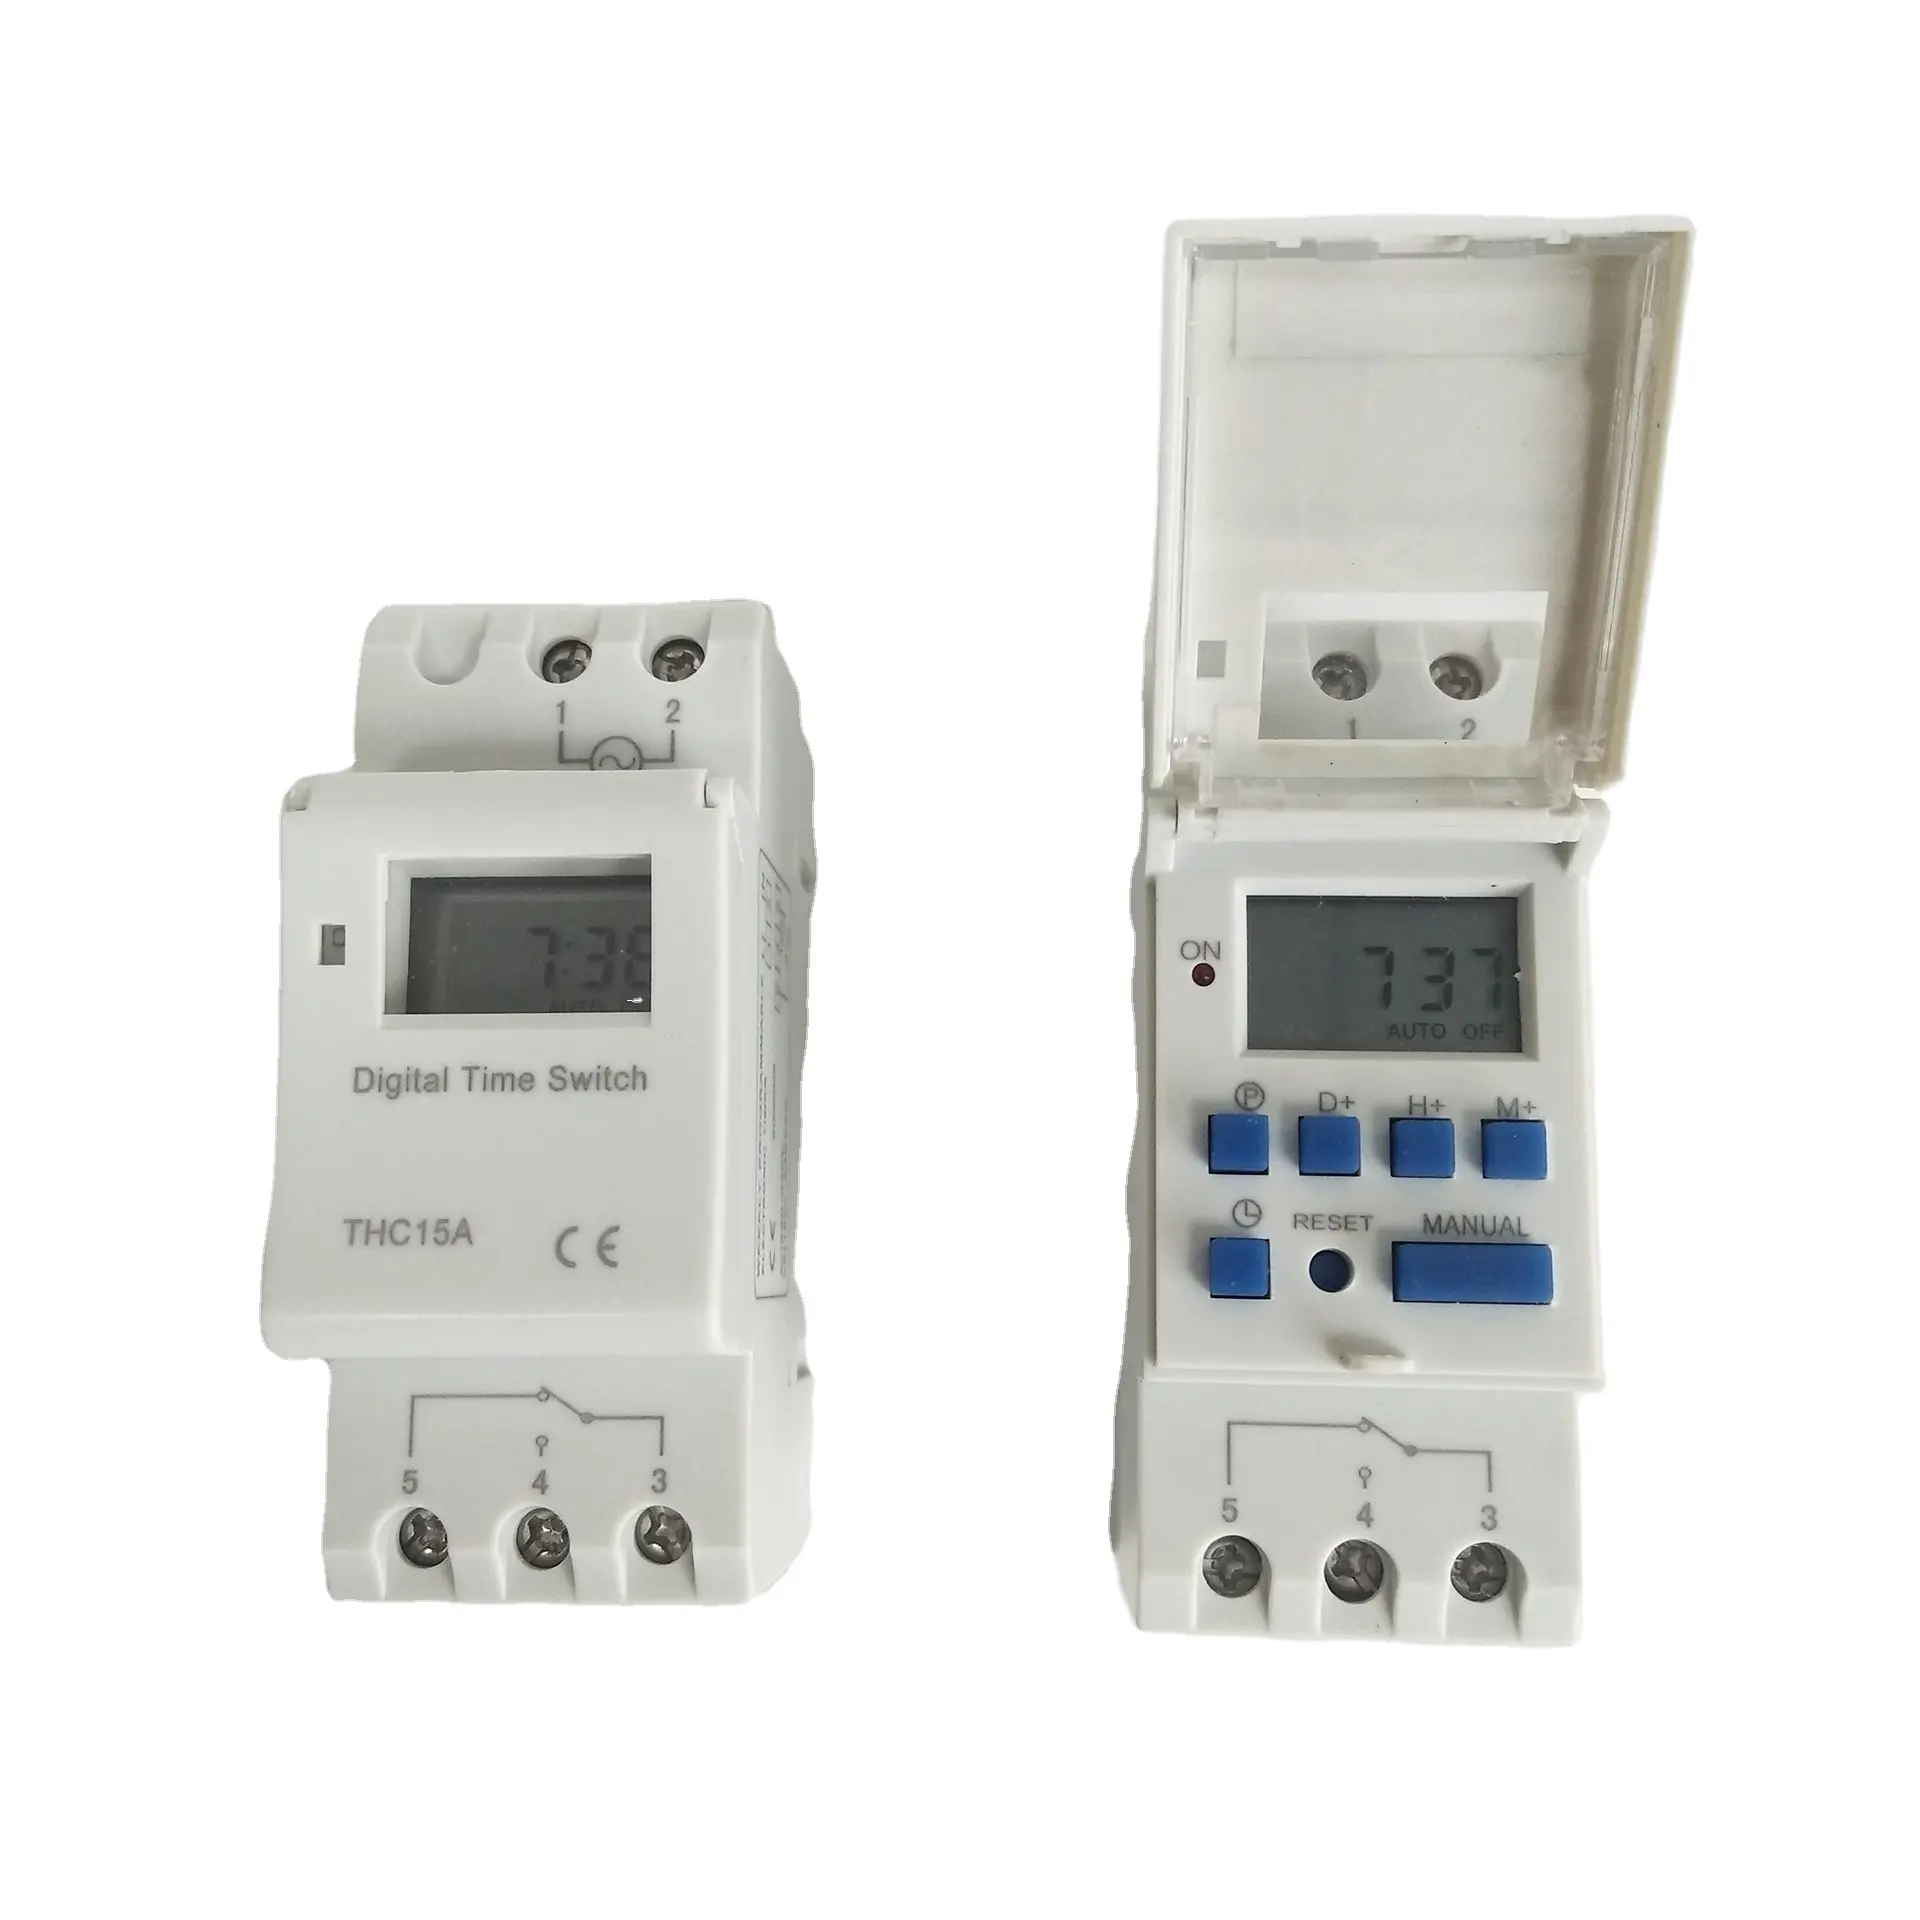 Multifunction Weekly Programmable Digital Timer 16A 110V LCD Display Electron Timer Switch